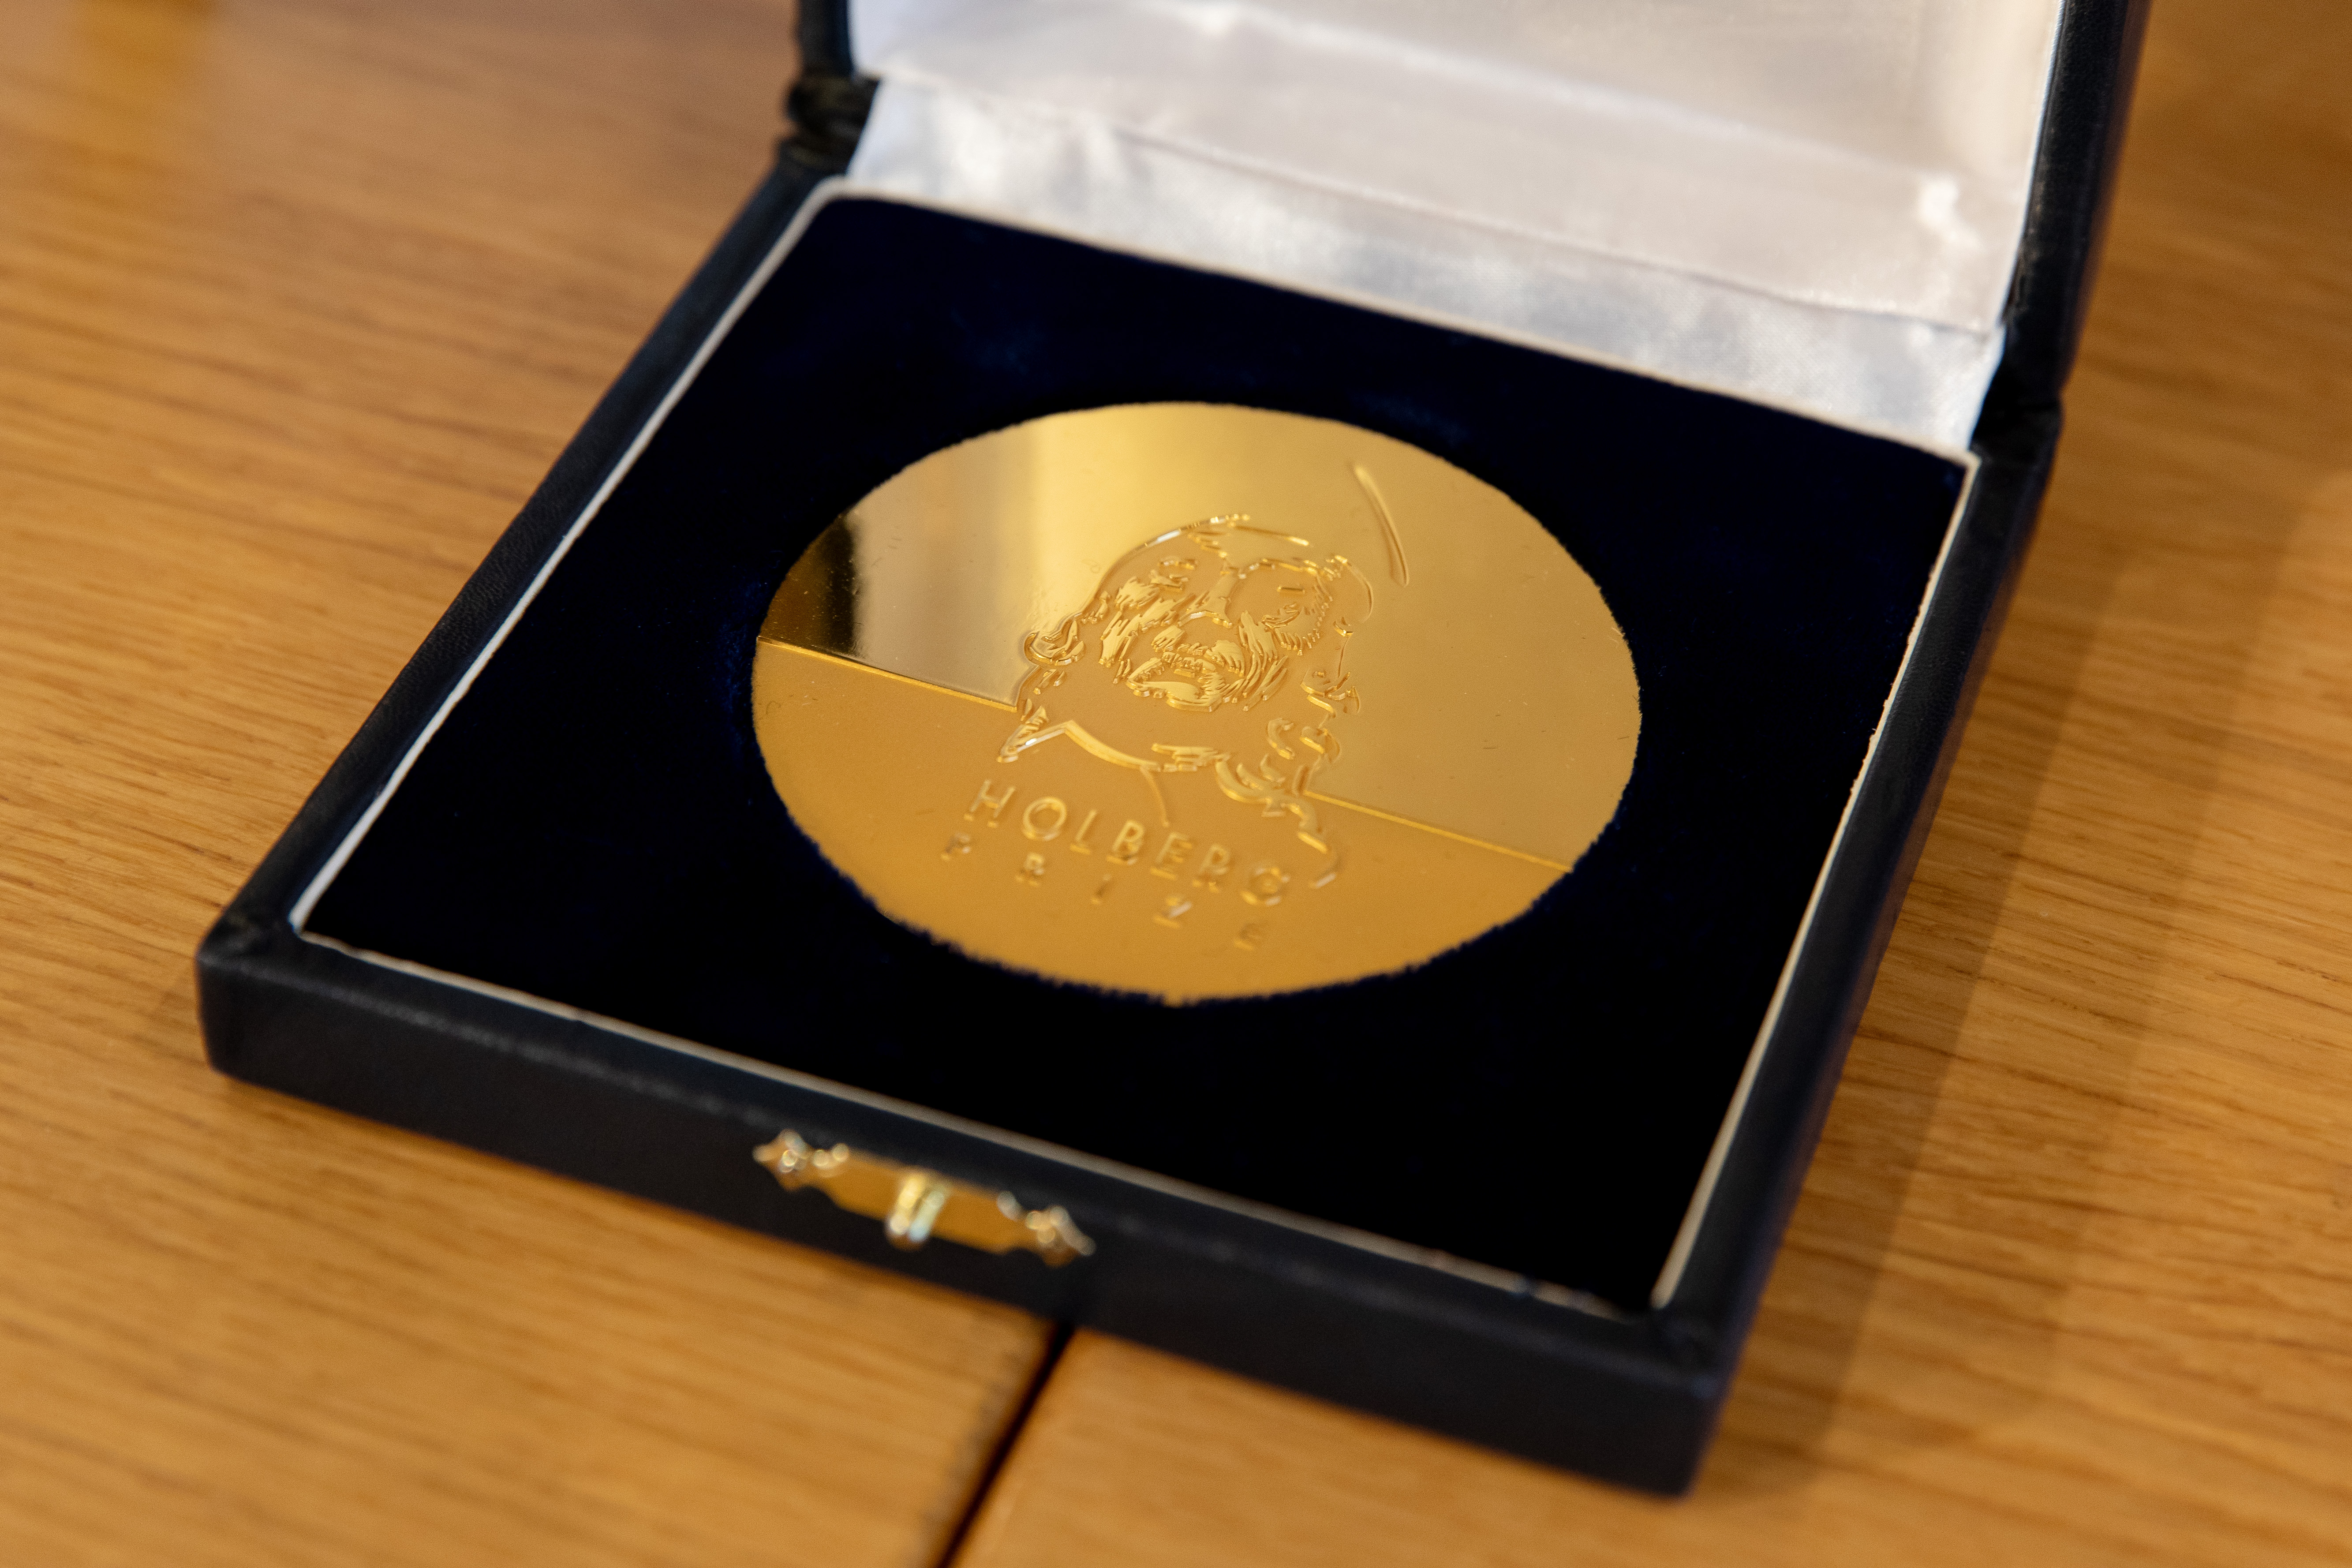 The Holberg Prize Medal